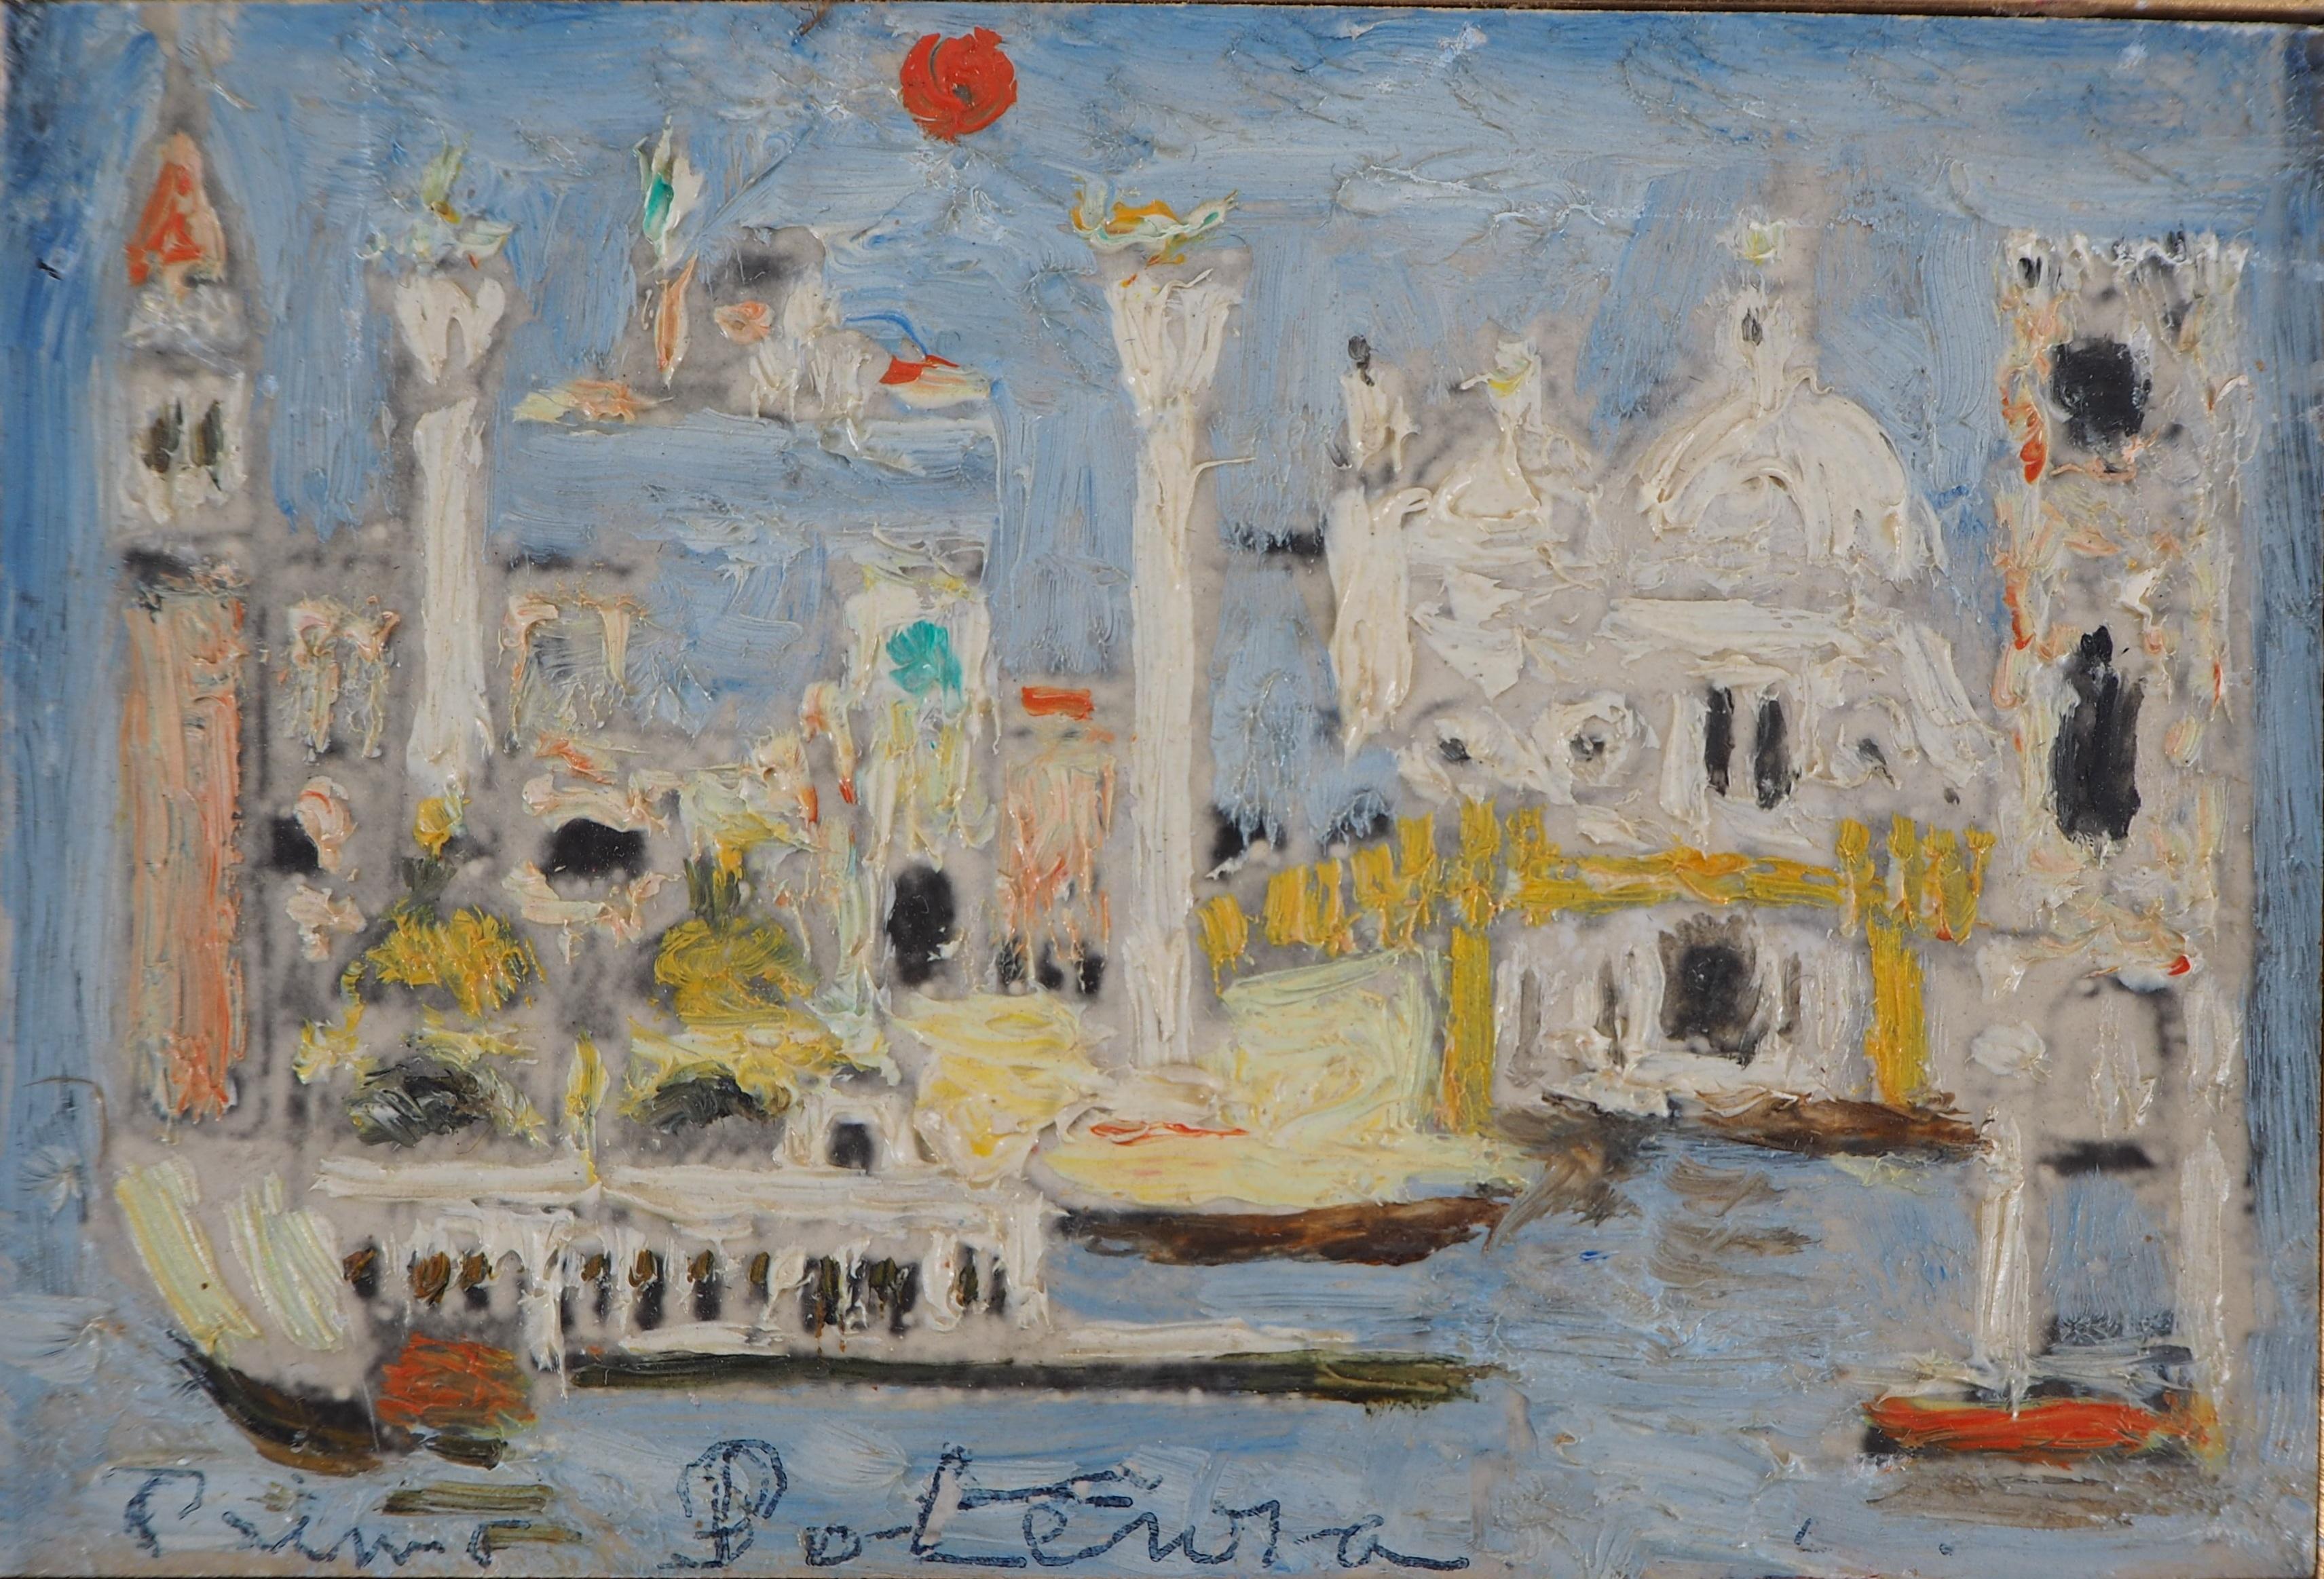 Venice With Red Sun - Original Oil Painting, Handsigned - Gray Landscape Painting by Primo POTENZA